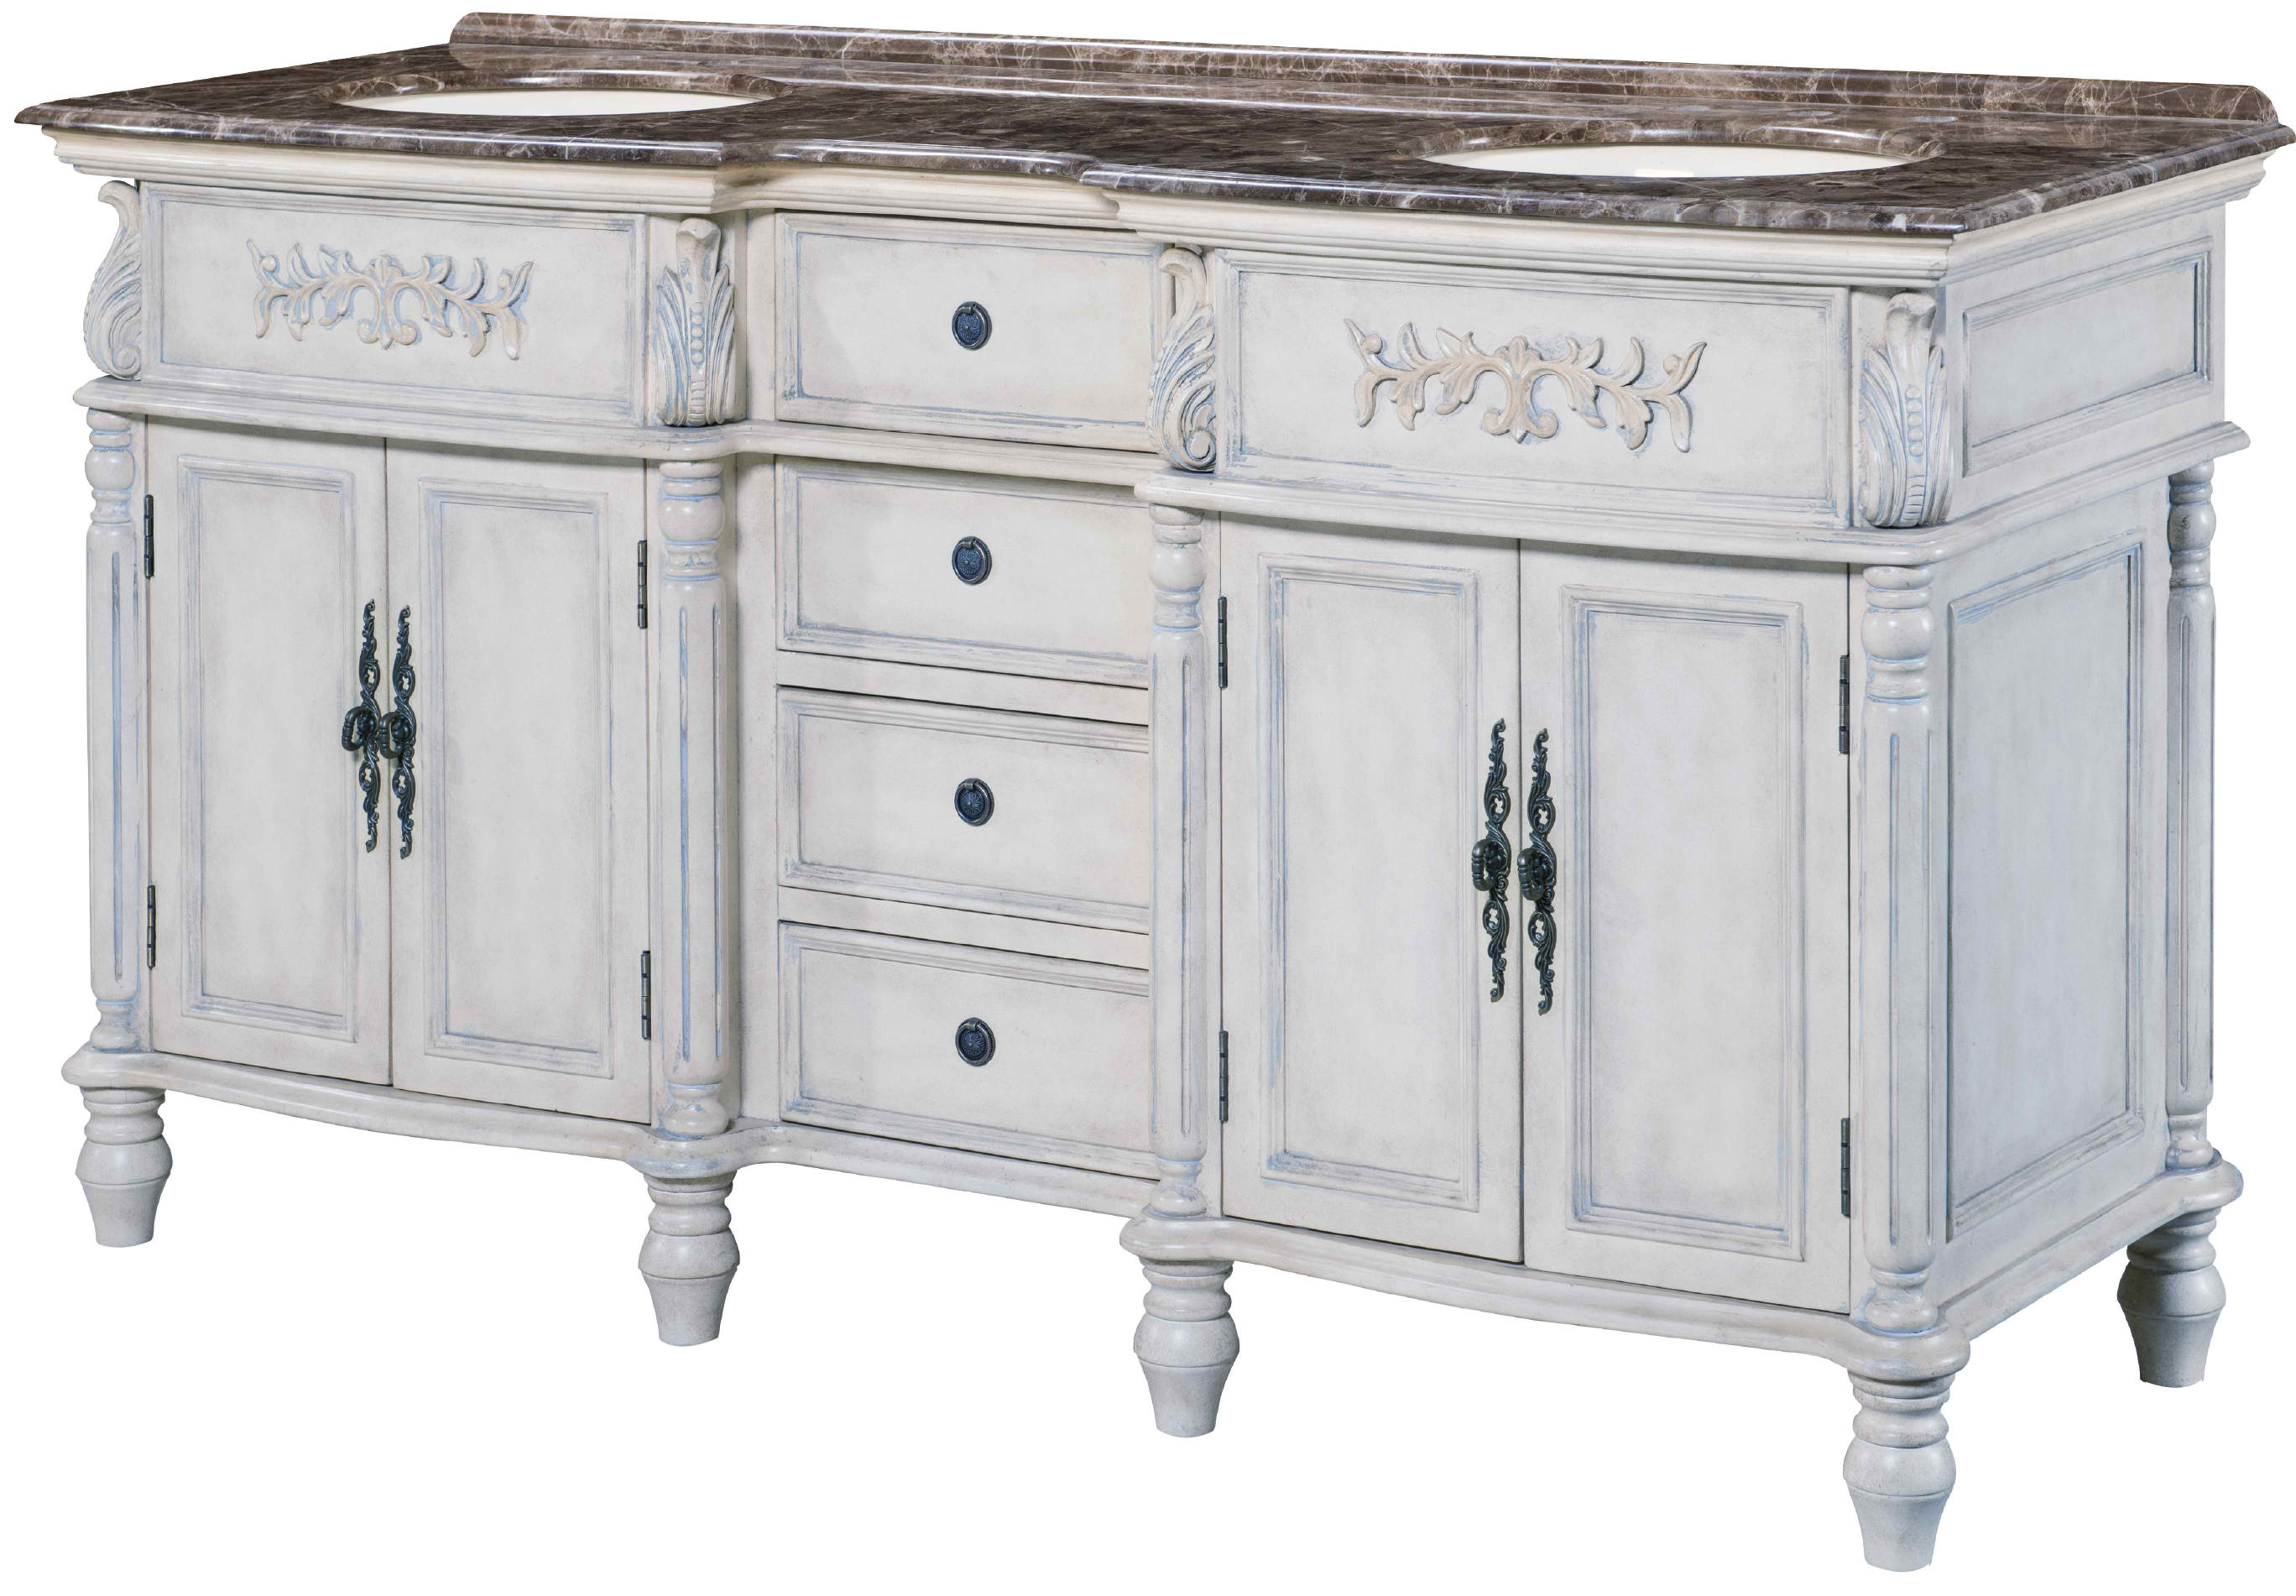 67" Antique White Double Sink with Emperador Marble Top Light Finish Vanity